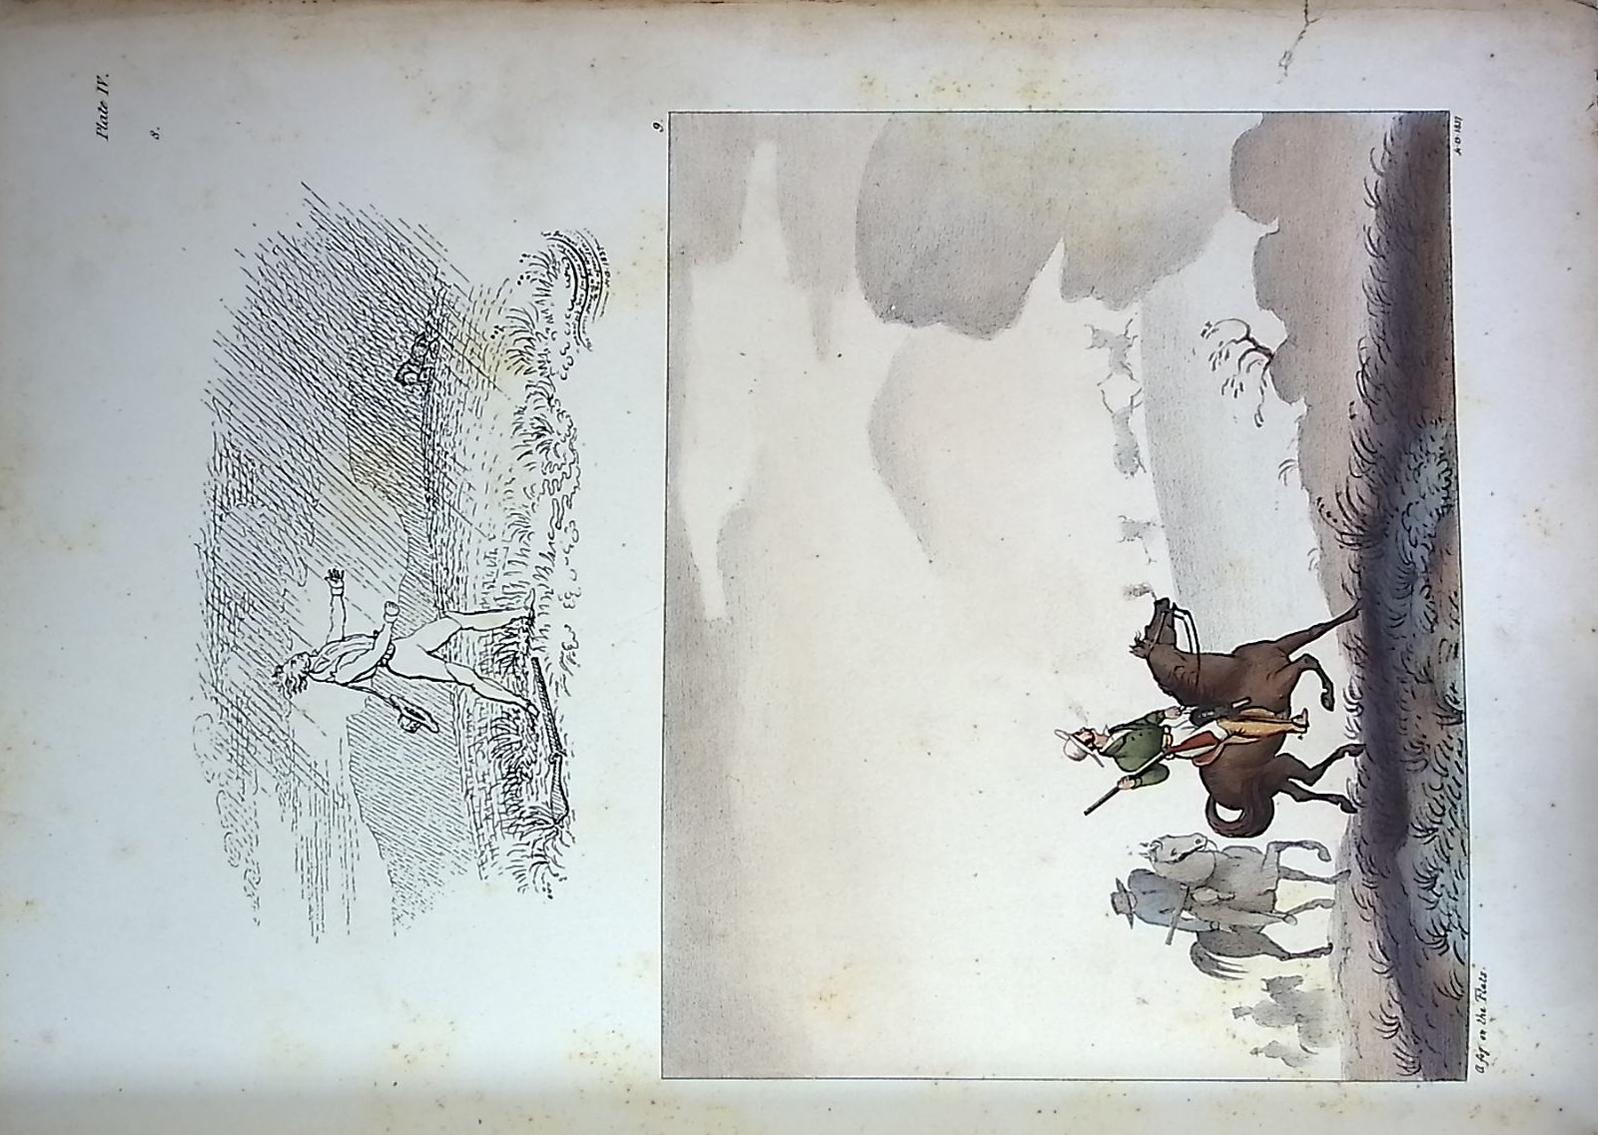 South African Sketches: Illustrative of The Wild Life of a Hunter on the Frontier of the Cape Colony.